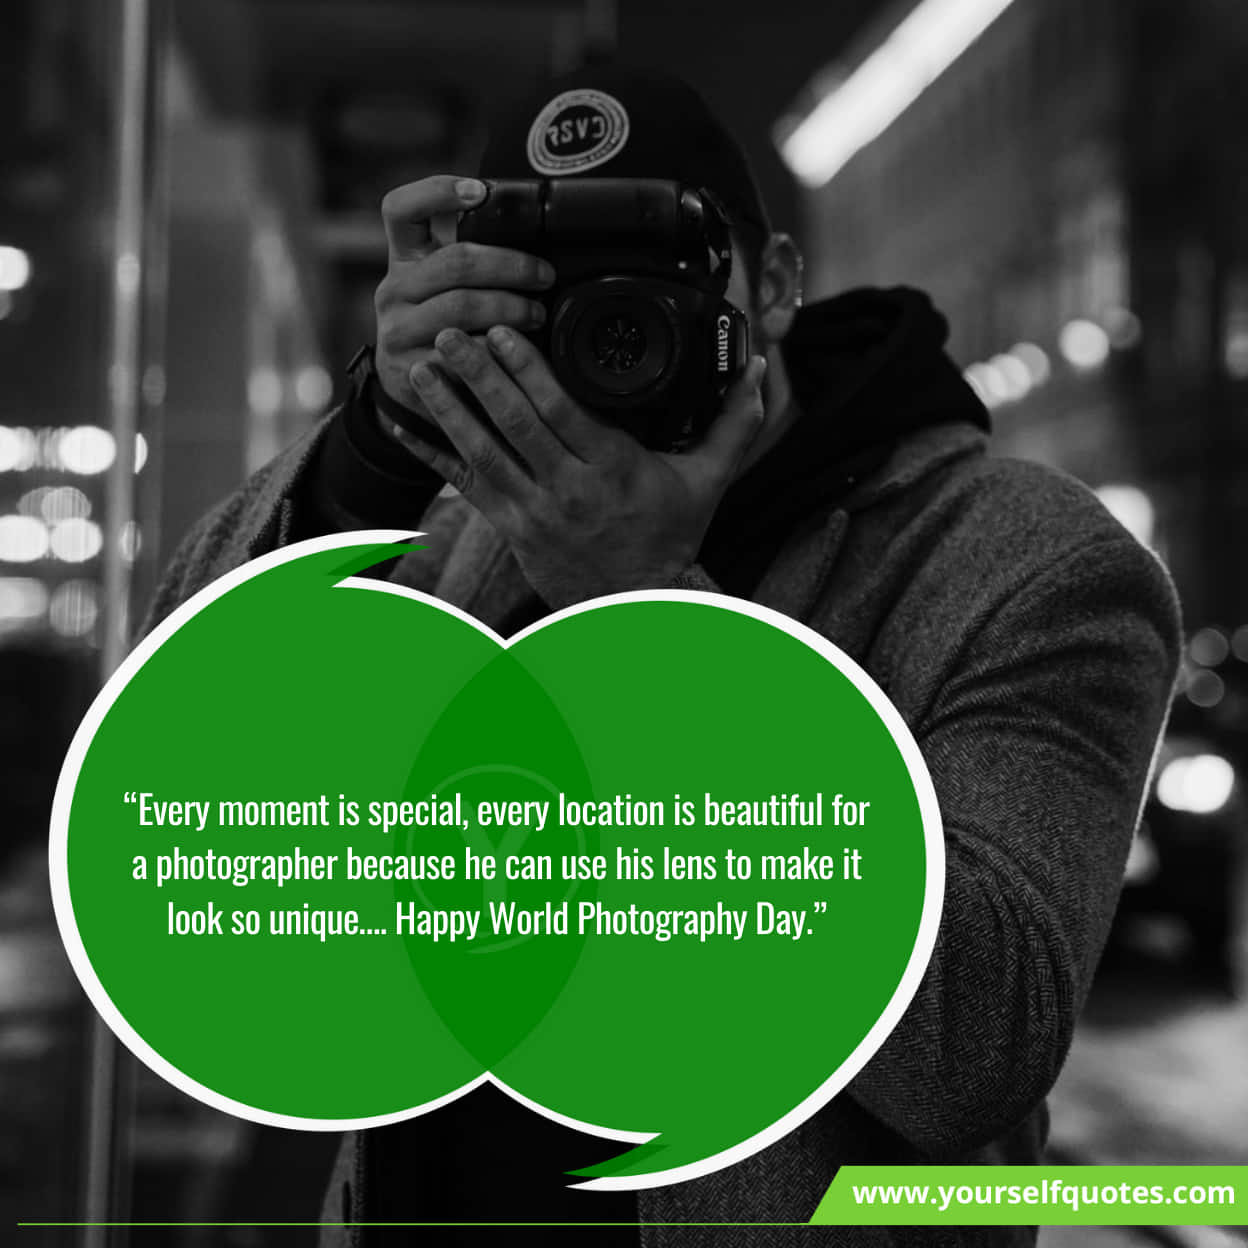 World Photography Inspiring Day Quotes